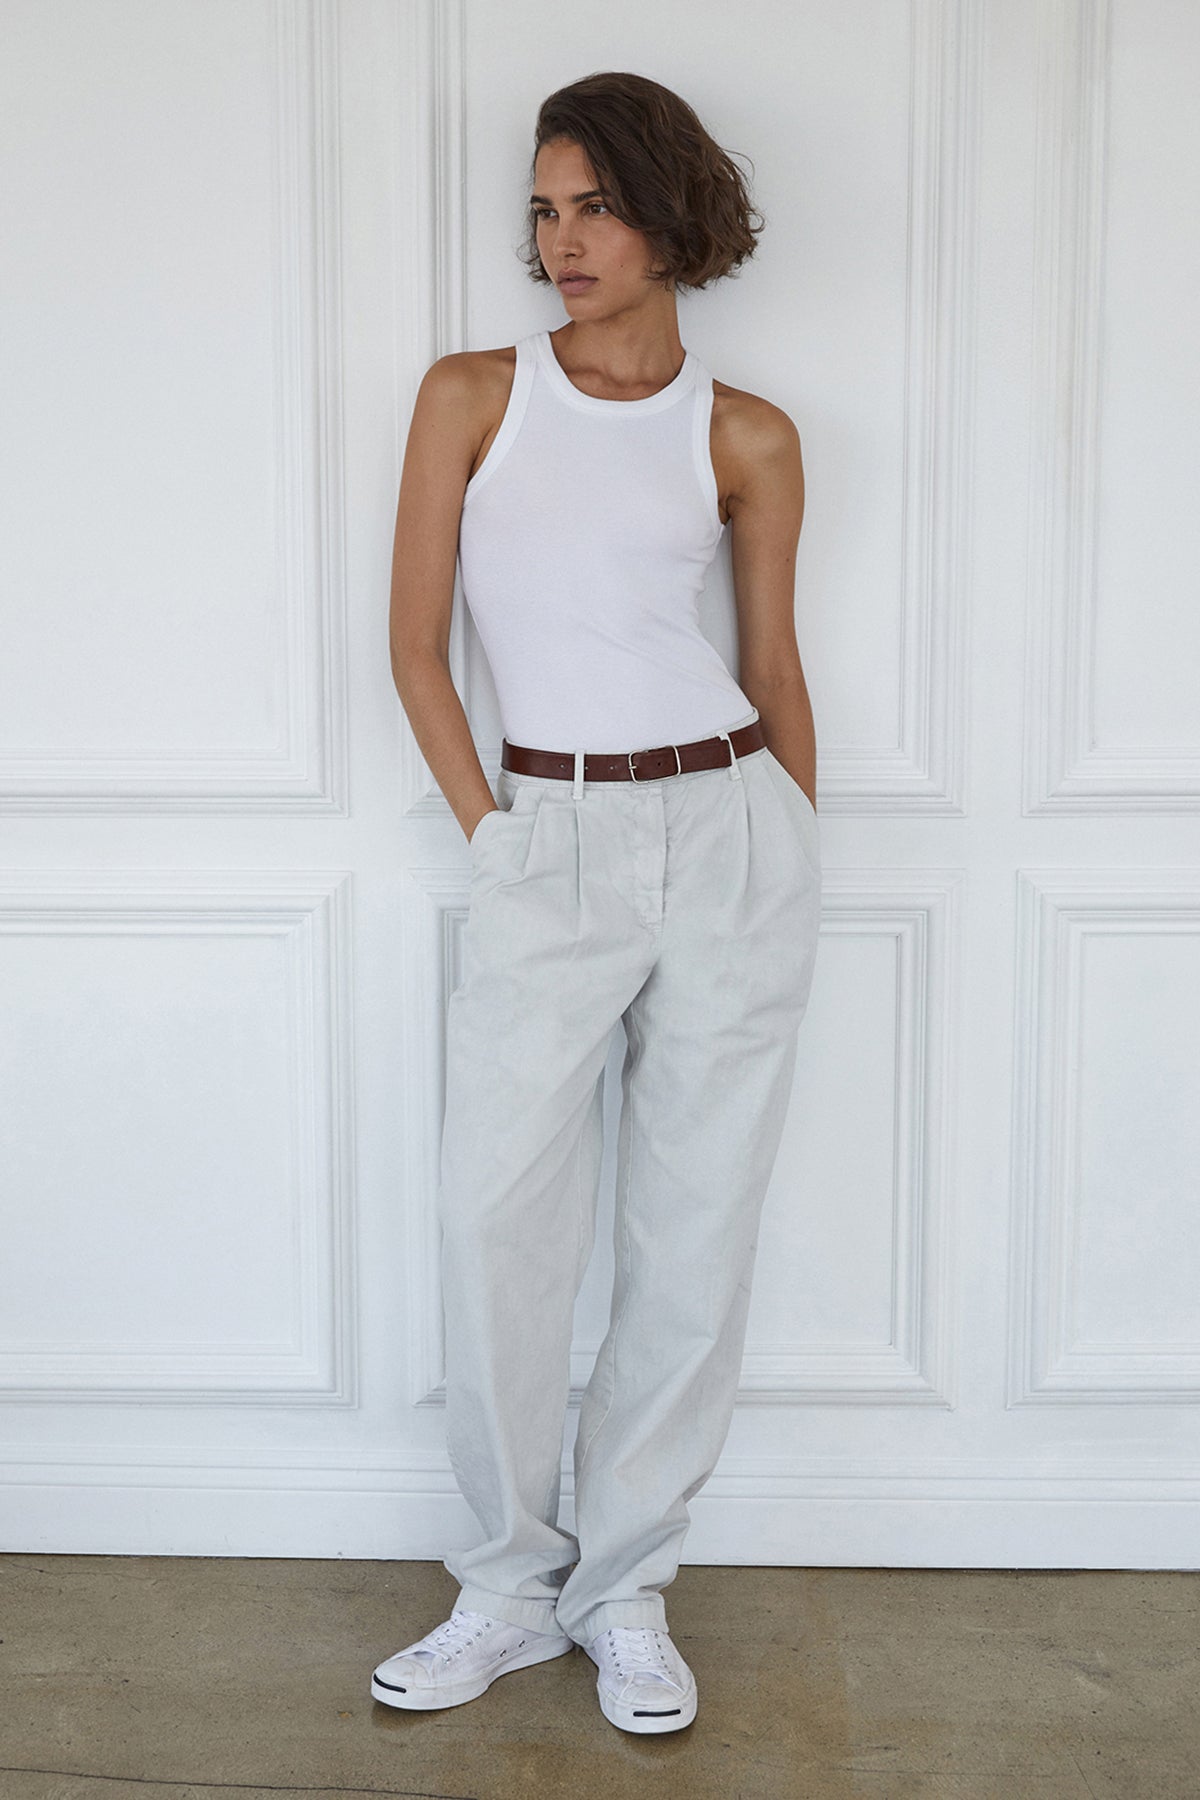 Temescal Pant in candle with Cruz tank in white full length front-26007137190081